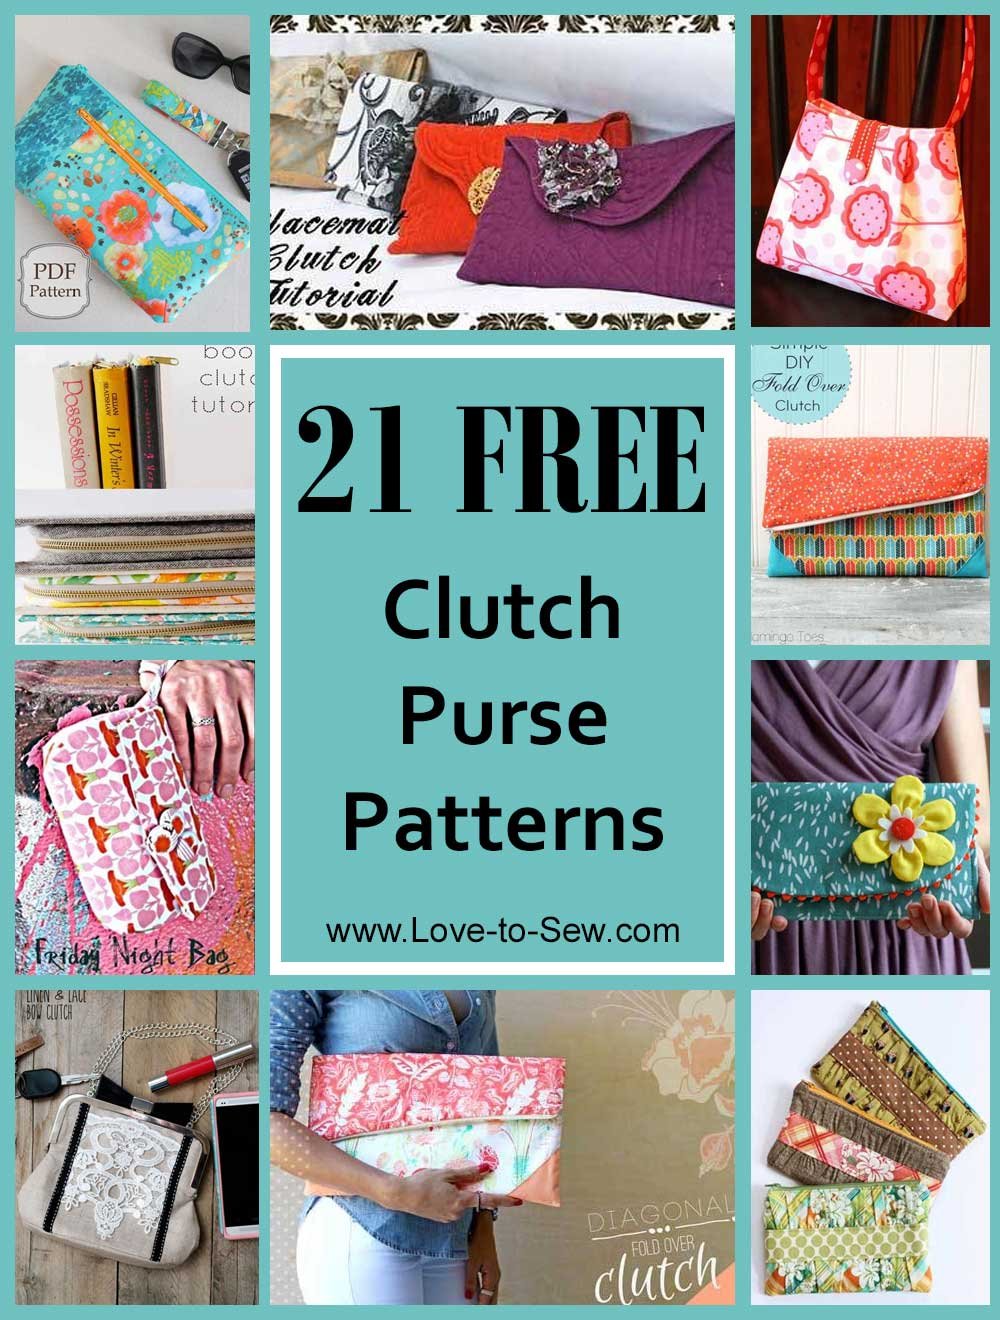 20 Free Clutch Sewing Patterns for Compact Couture! | AllFreeSewing.com